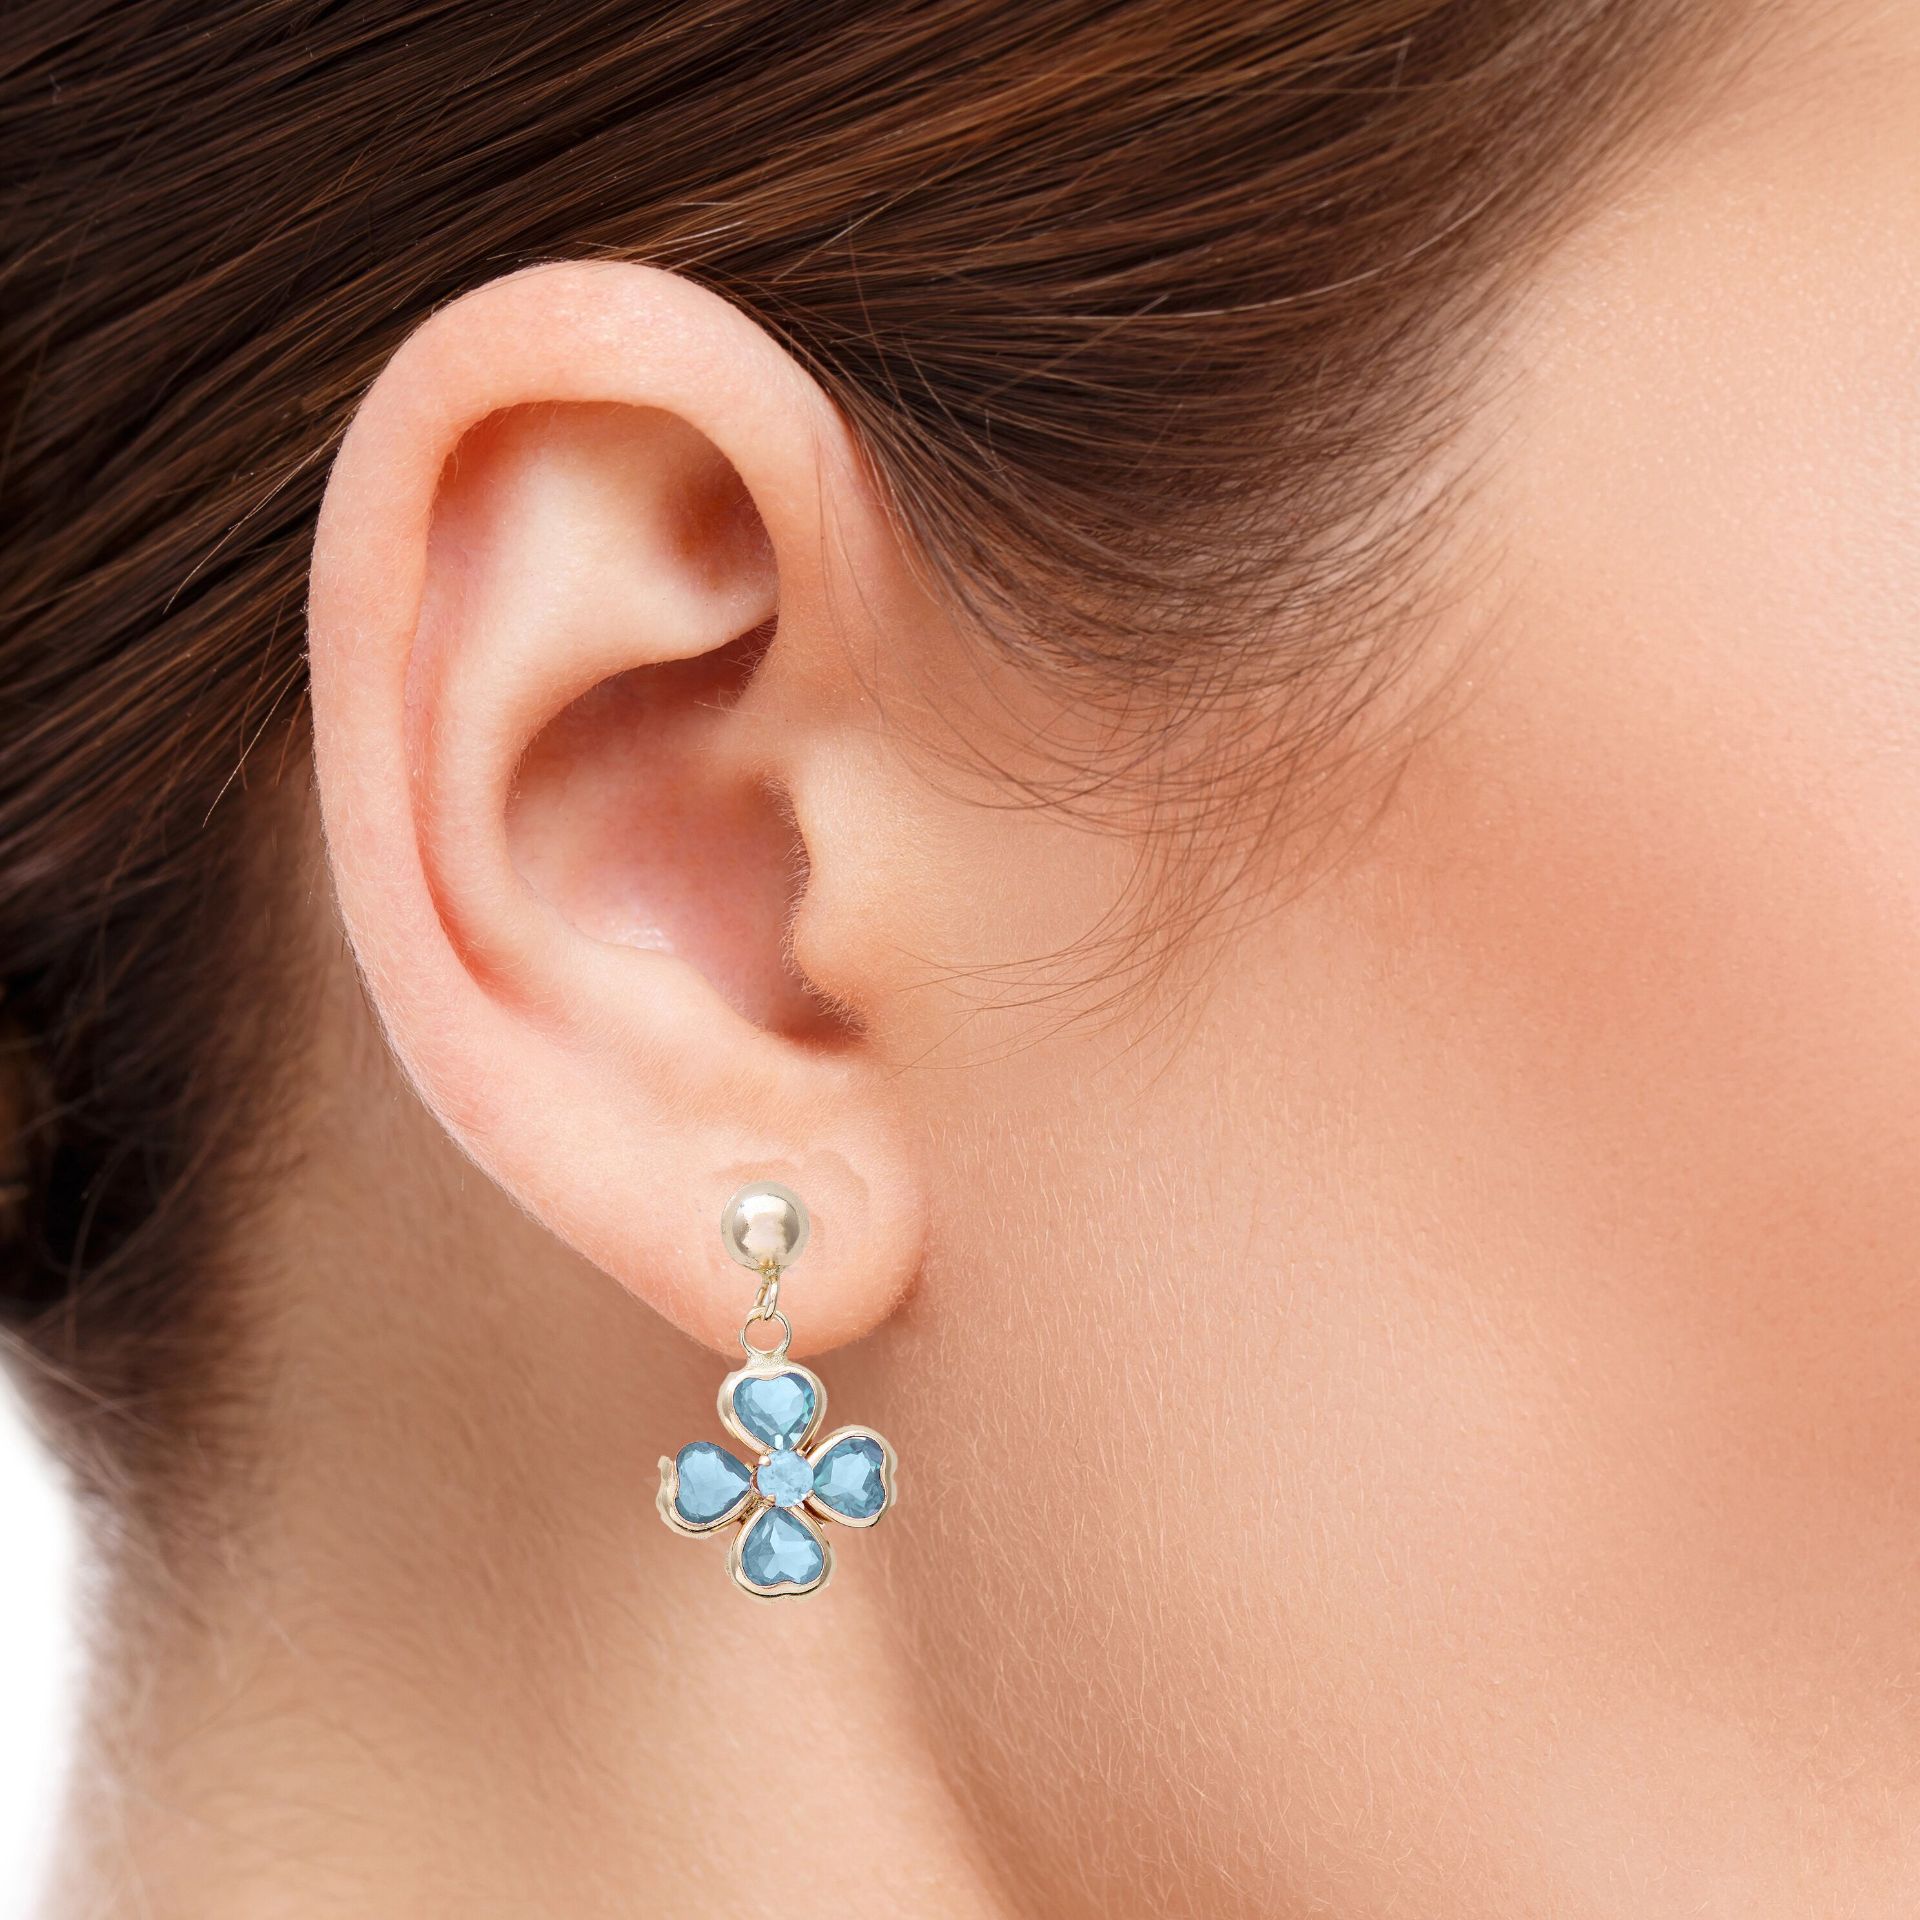 Blue Topaz Natural Gemstone Flower Shaped Earrings, Metal 9ct Yellow Gold, Weight (g) 1.1, RRP £ - Image 2 of 4